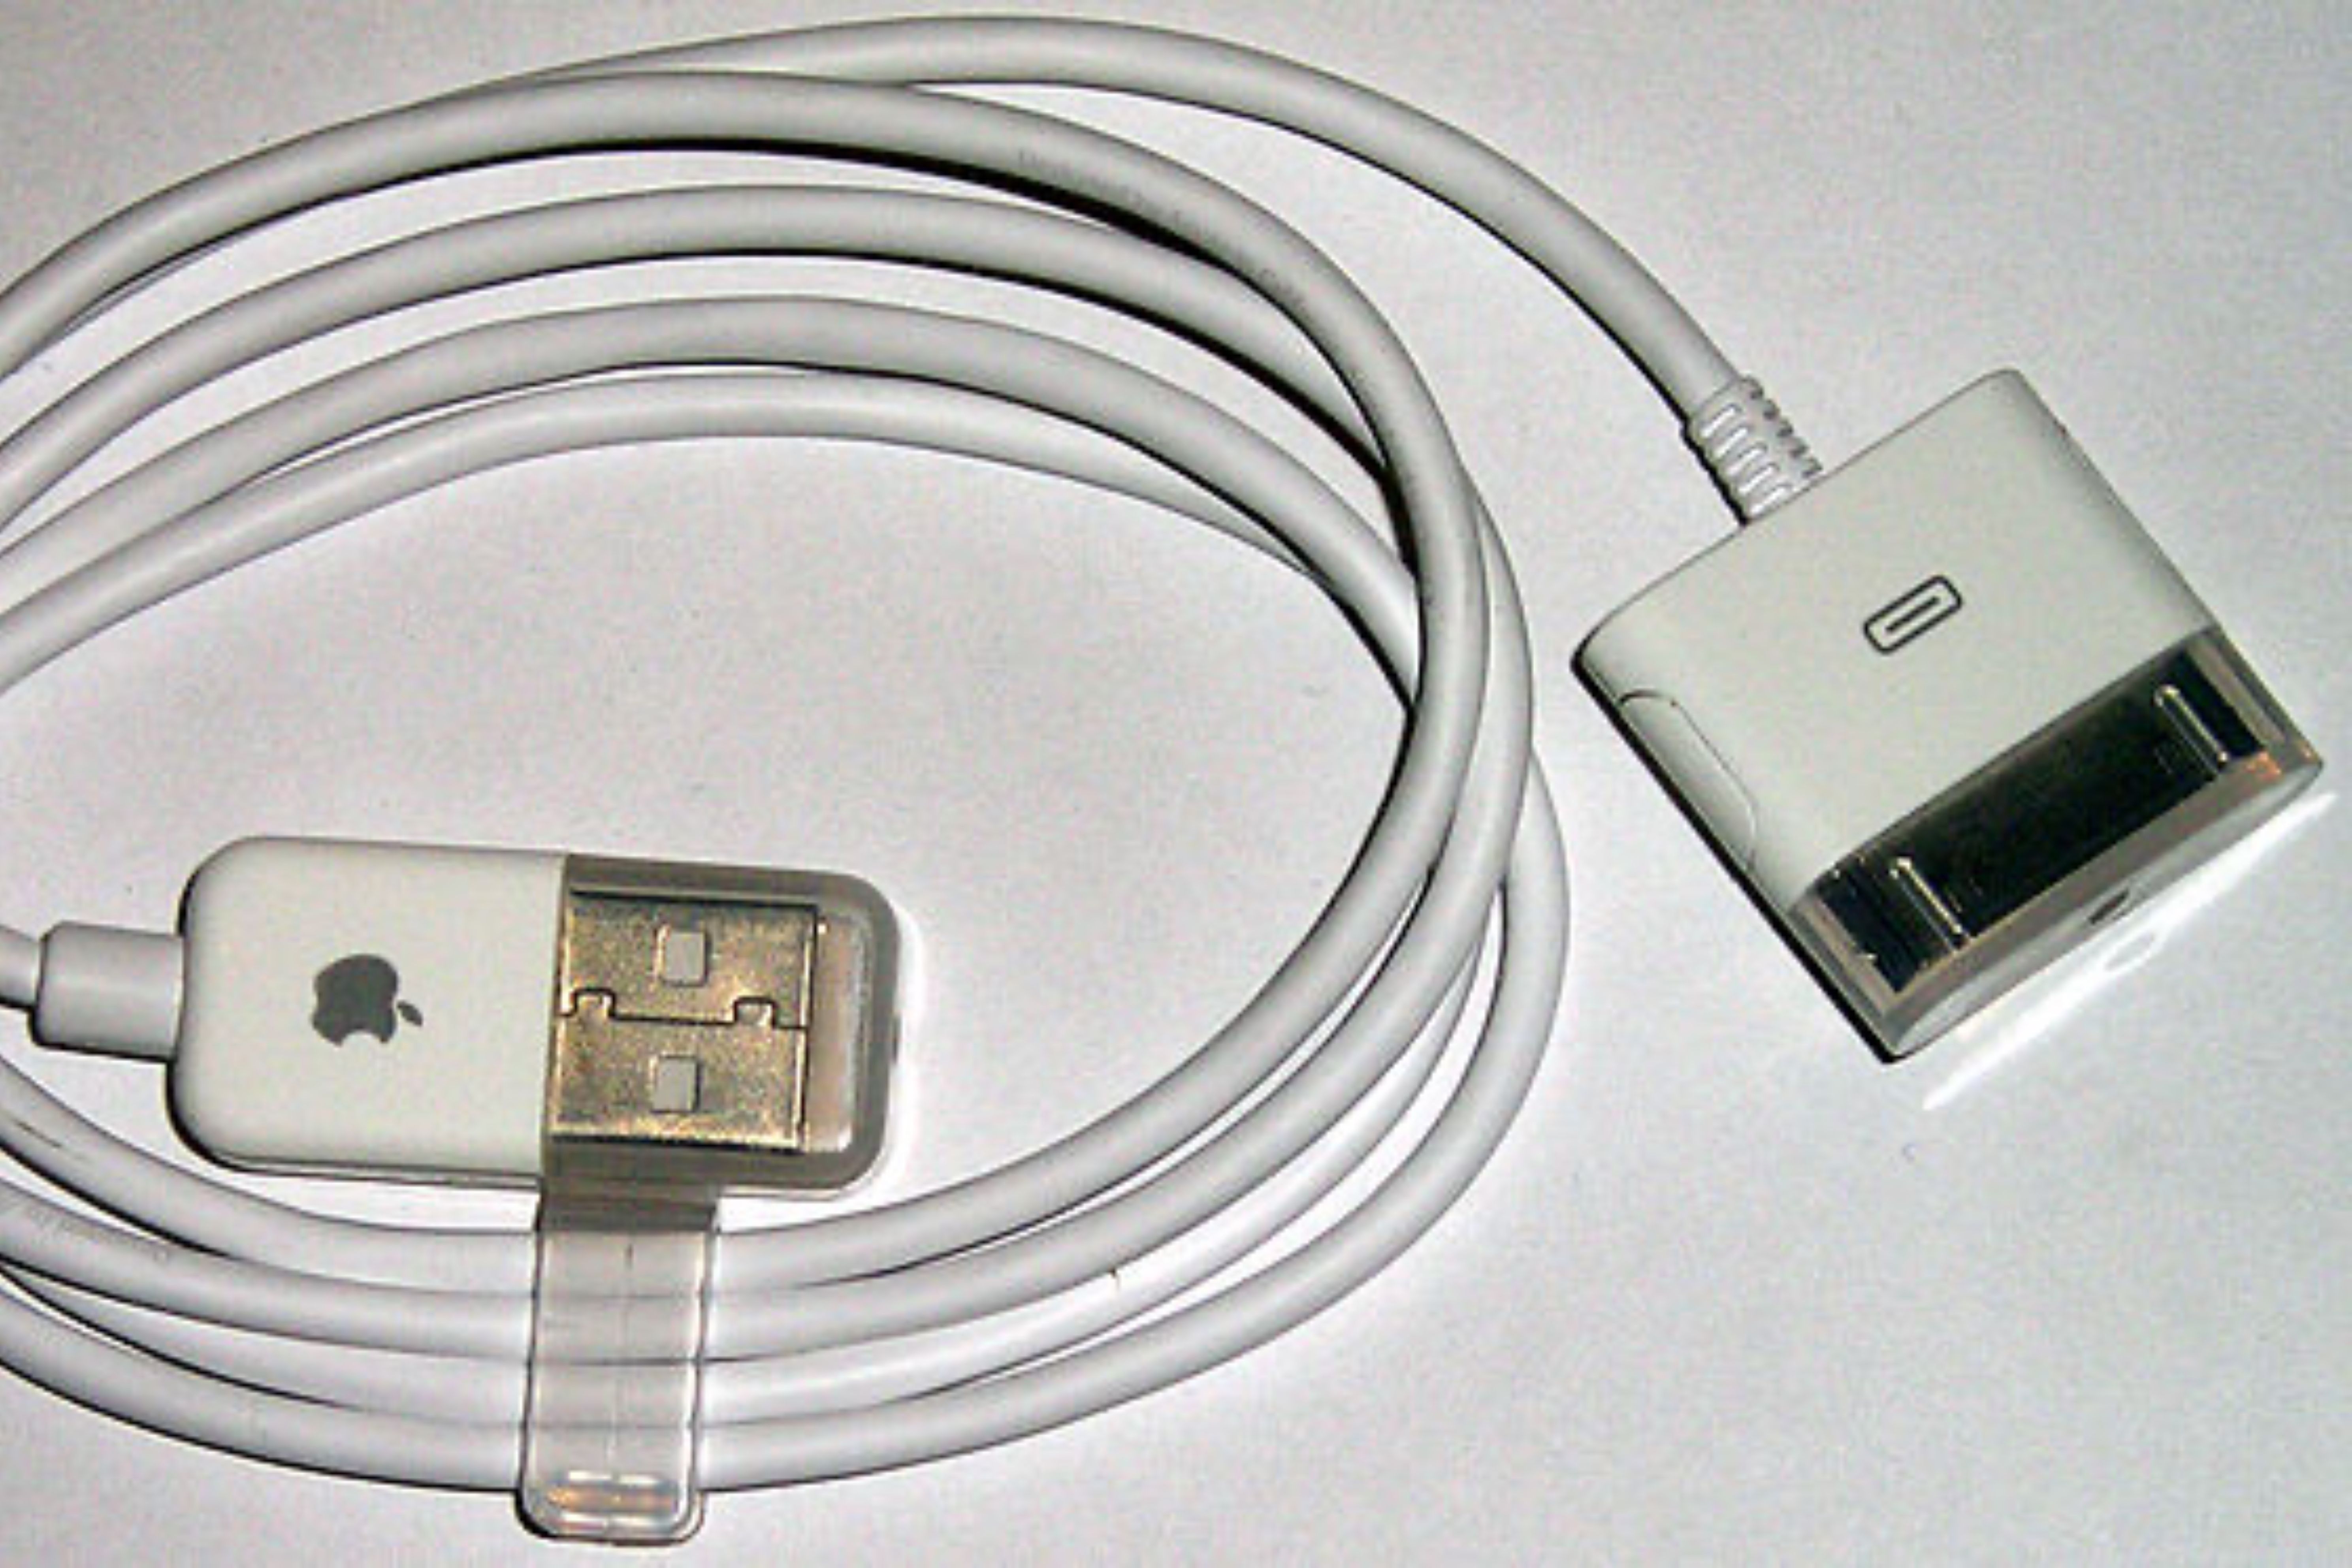 A 30-pin to USB cable.